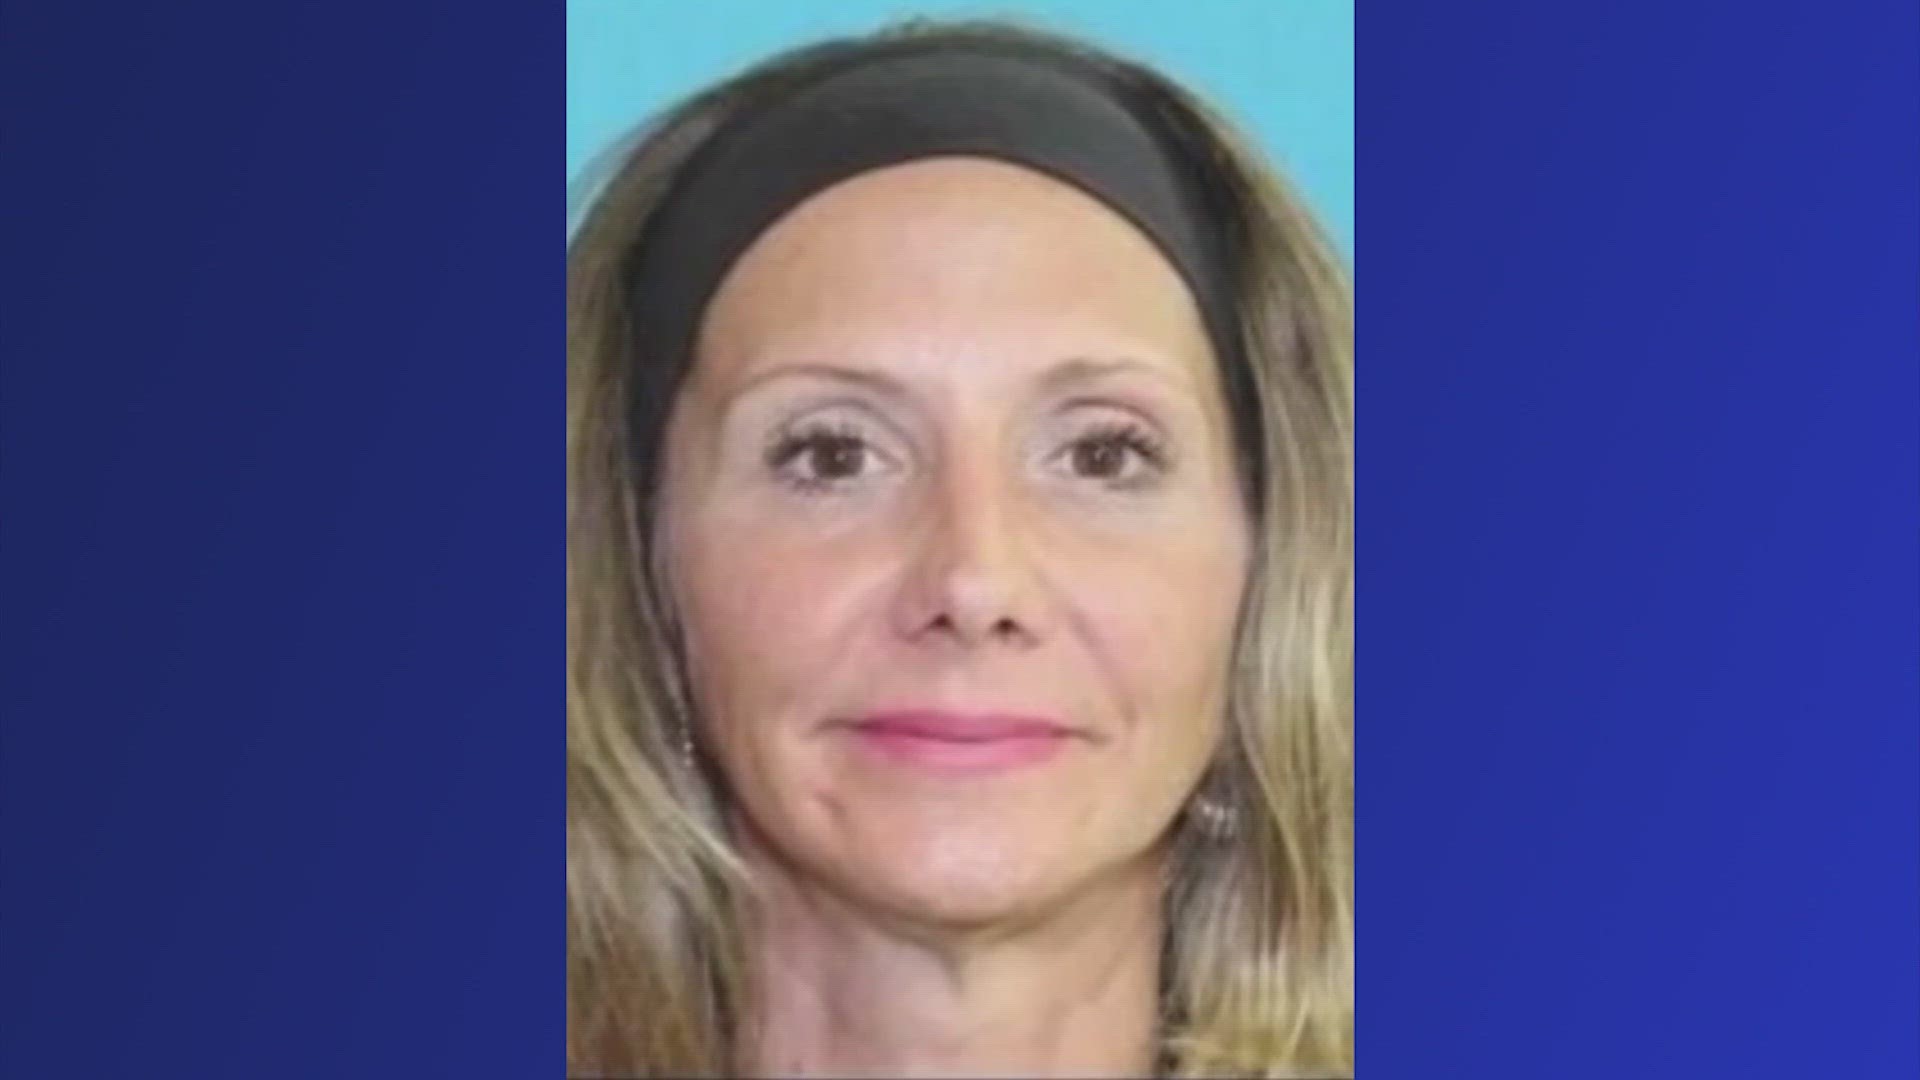 The Montgomery County Sheriff's Office said 46-year-old Erica Ives was last seen on Broadway Avenue near Conroe on July 10.